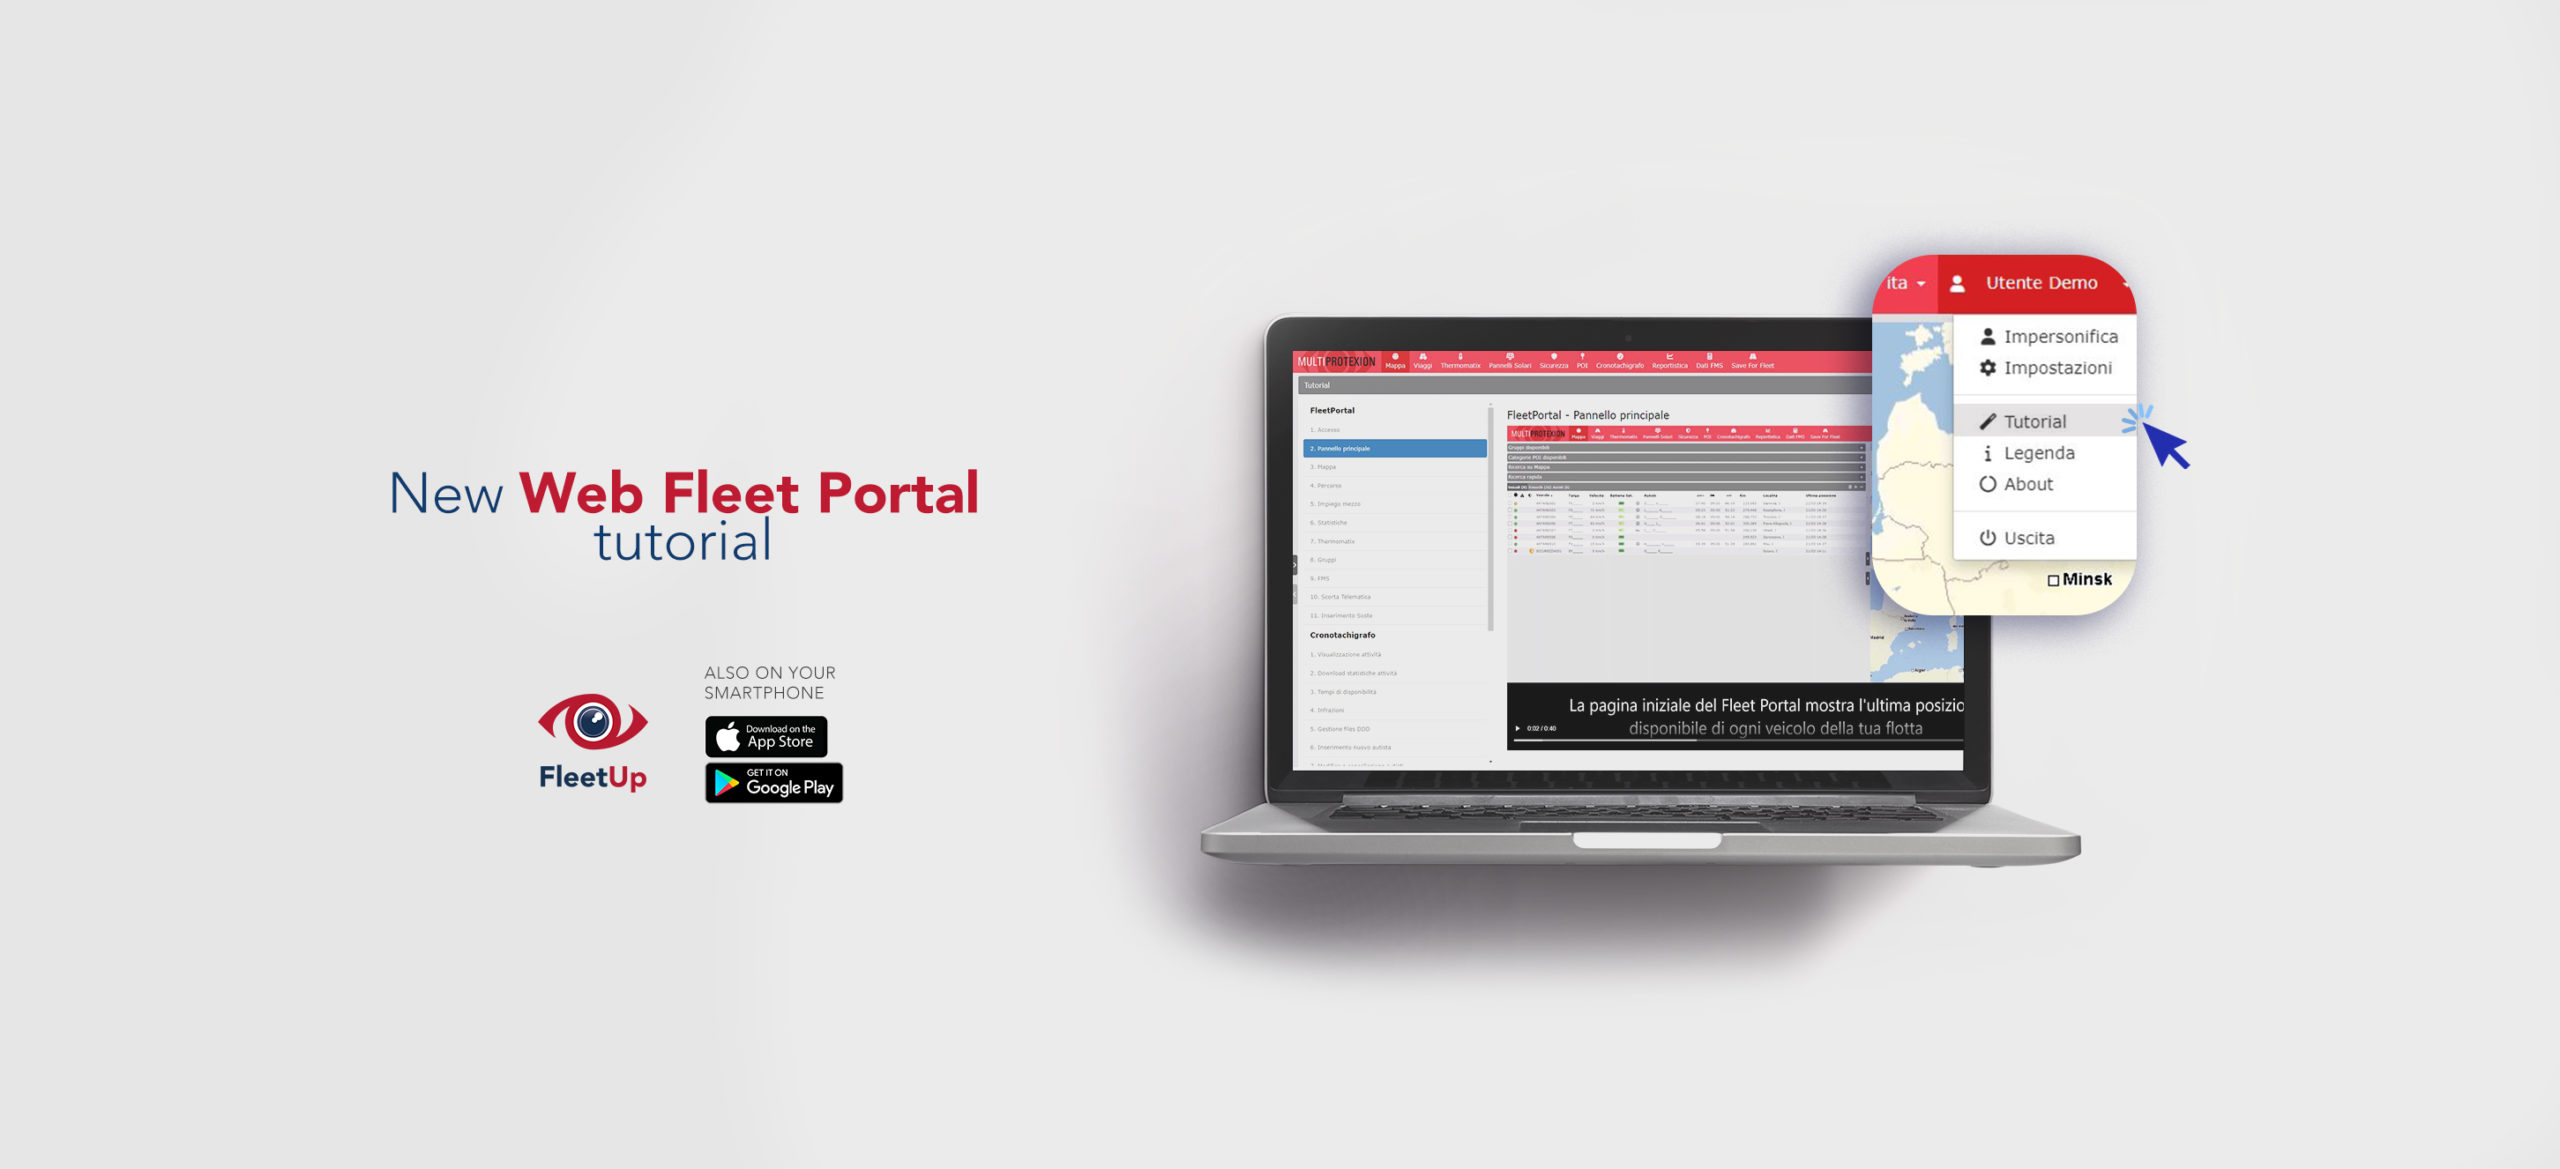 WEB FLEET PORTAL: HERE IS THE “TUTORIAL” SECTION